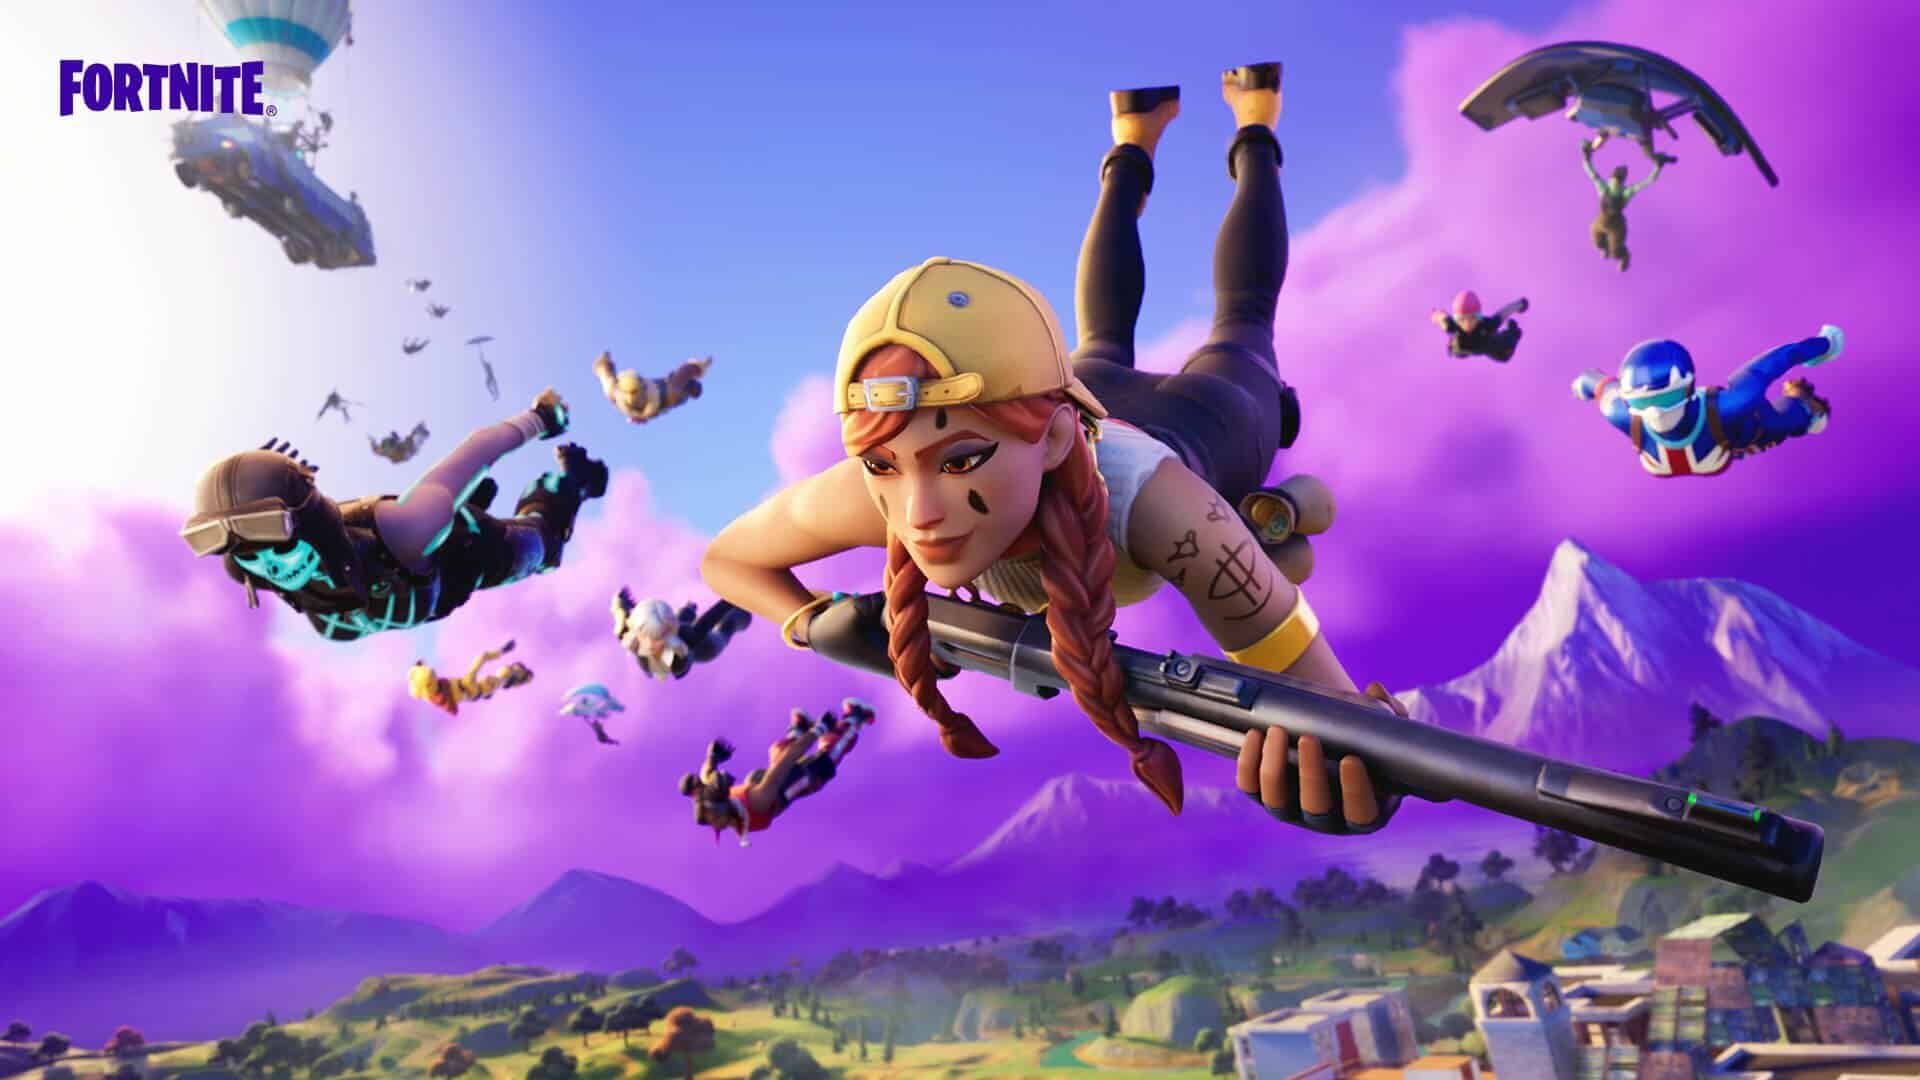 Leaking in Fortnite reveals that new locations will come to the game in this chapter 4